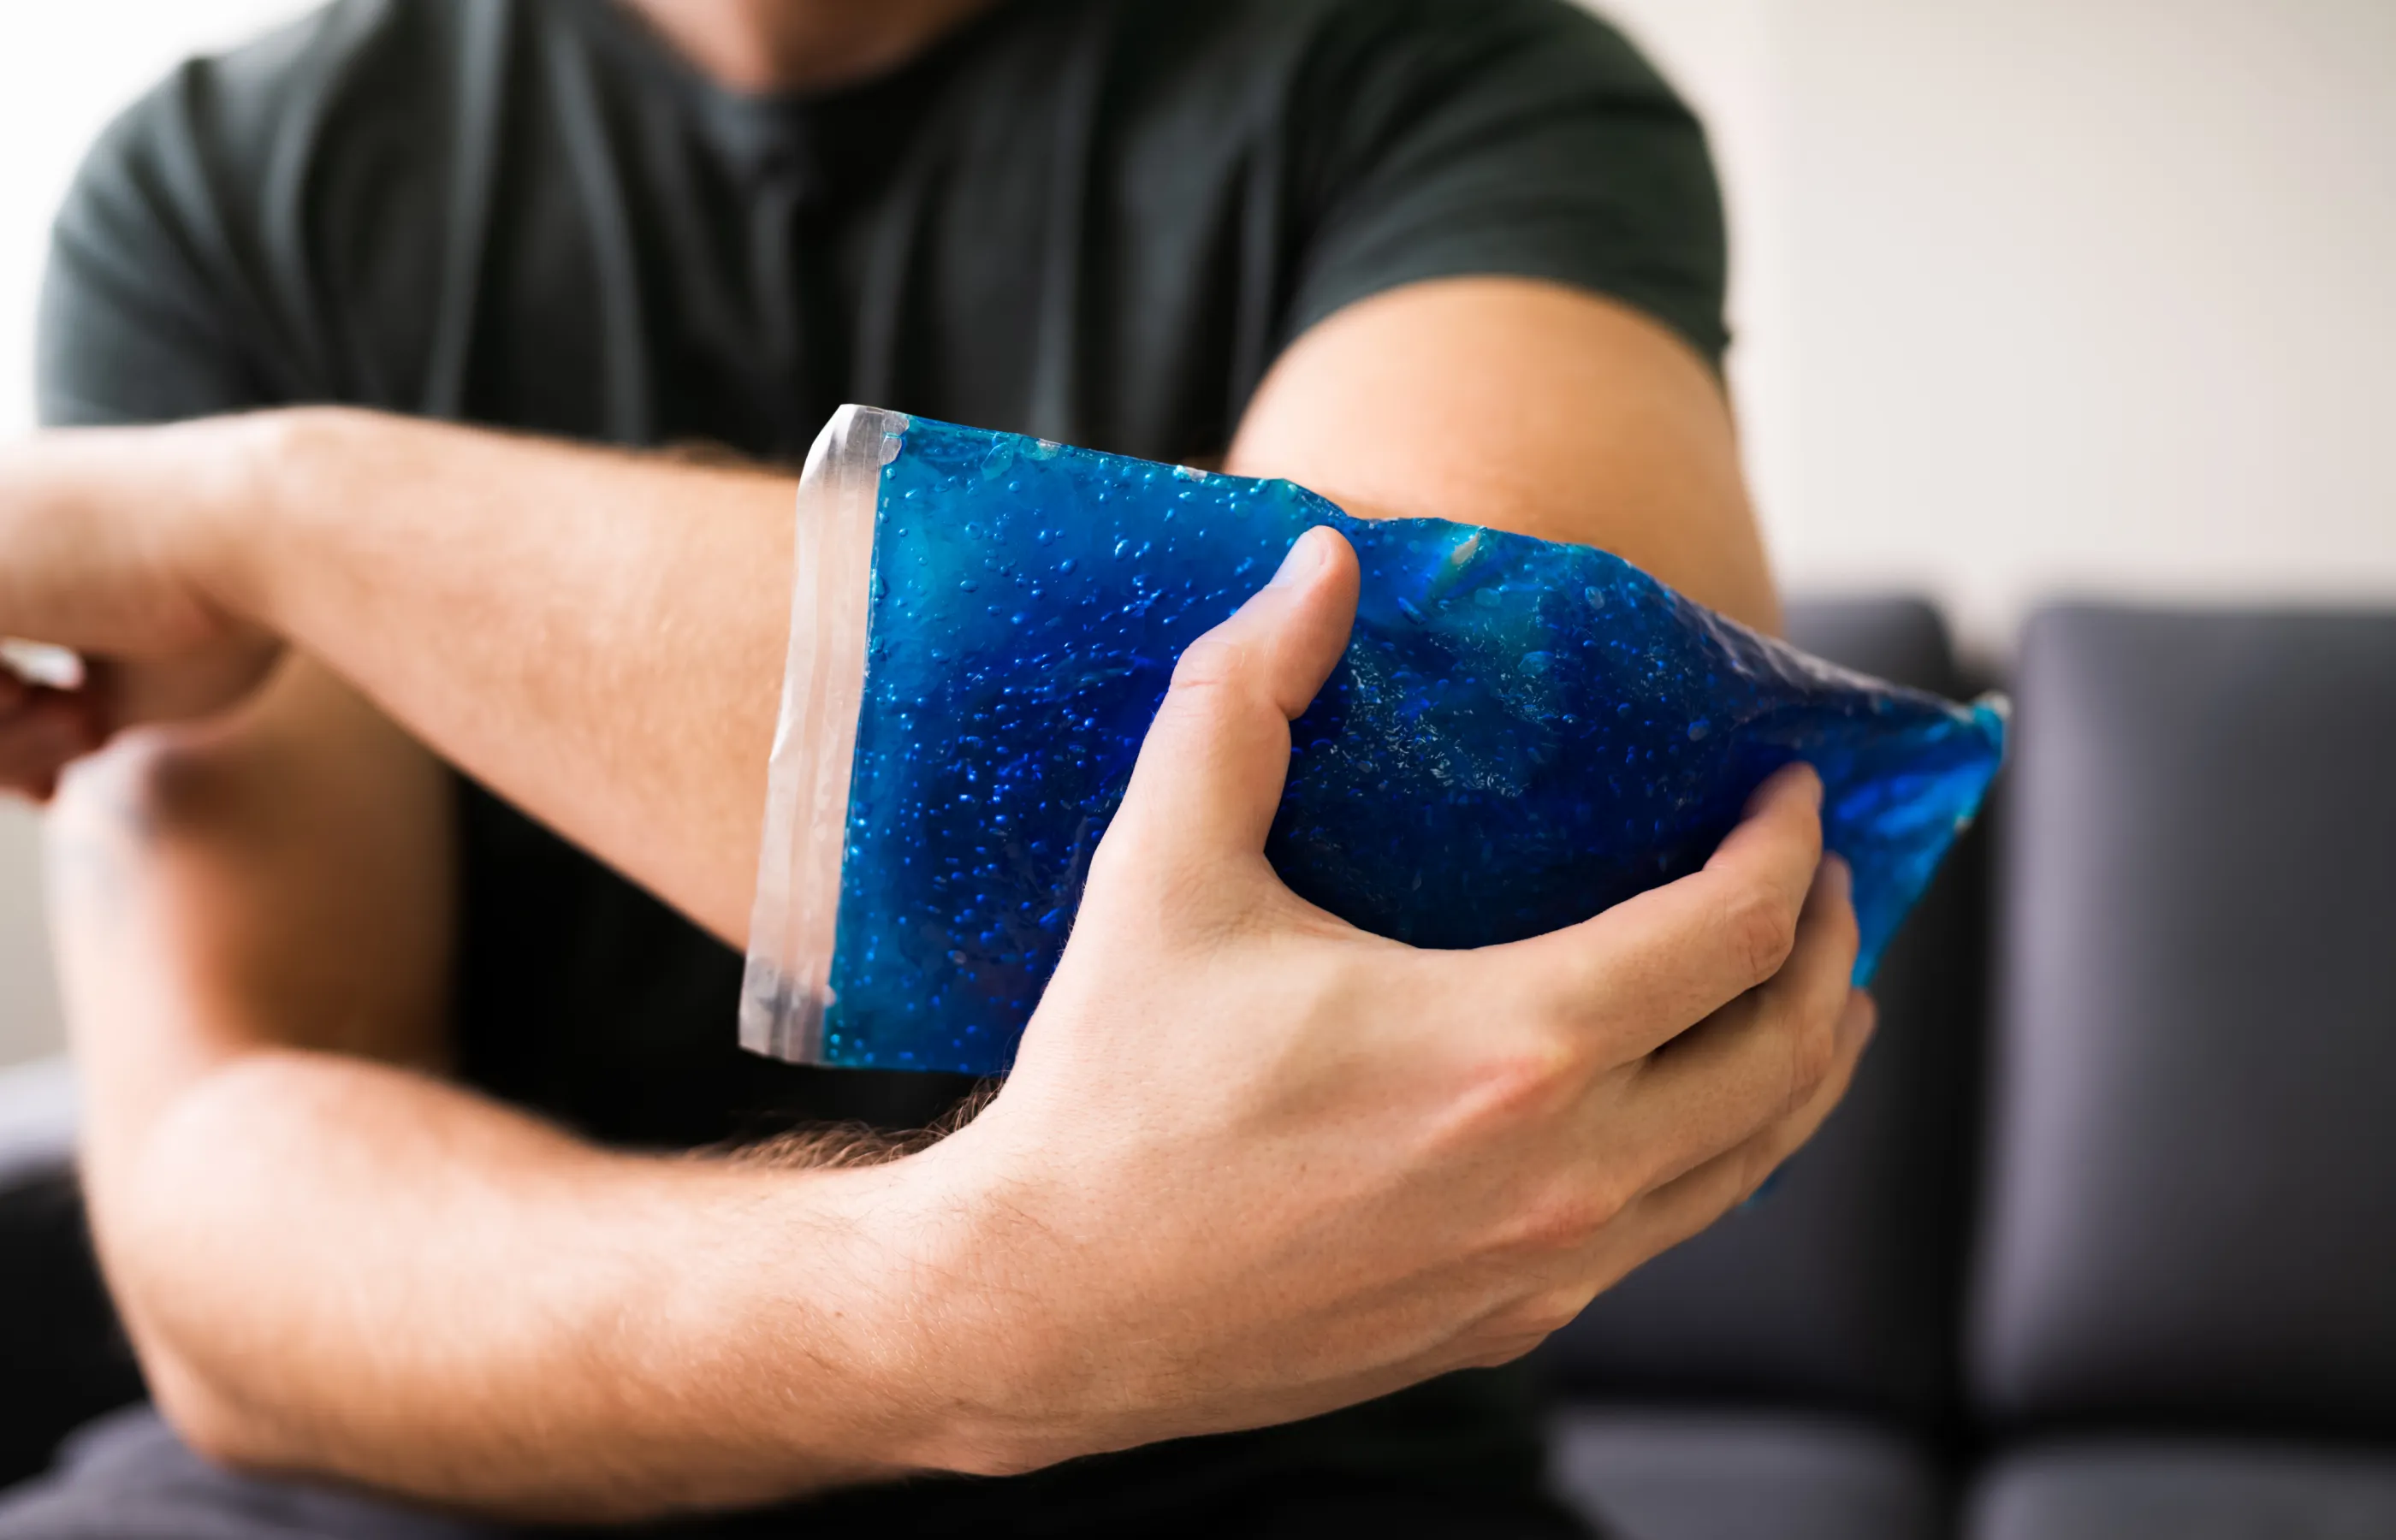 A person is holding an ice pack to their elbow